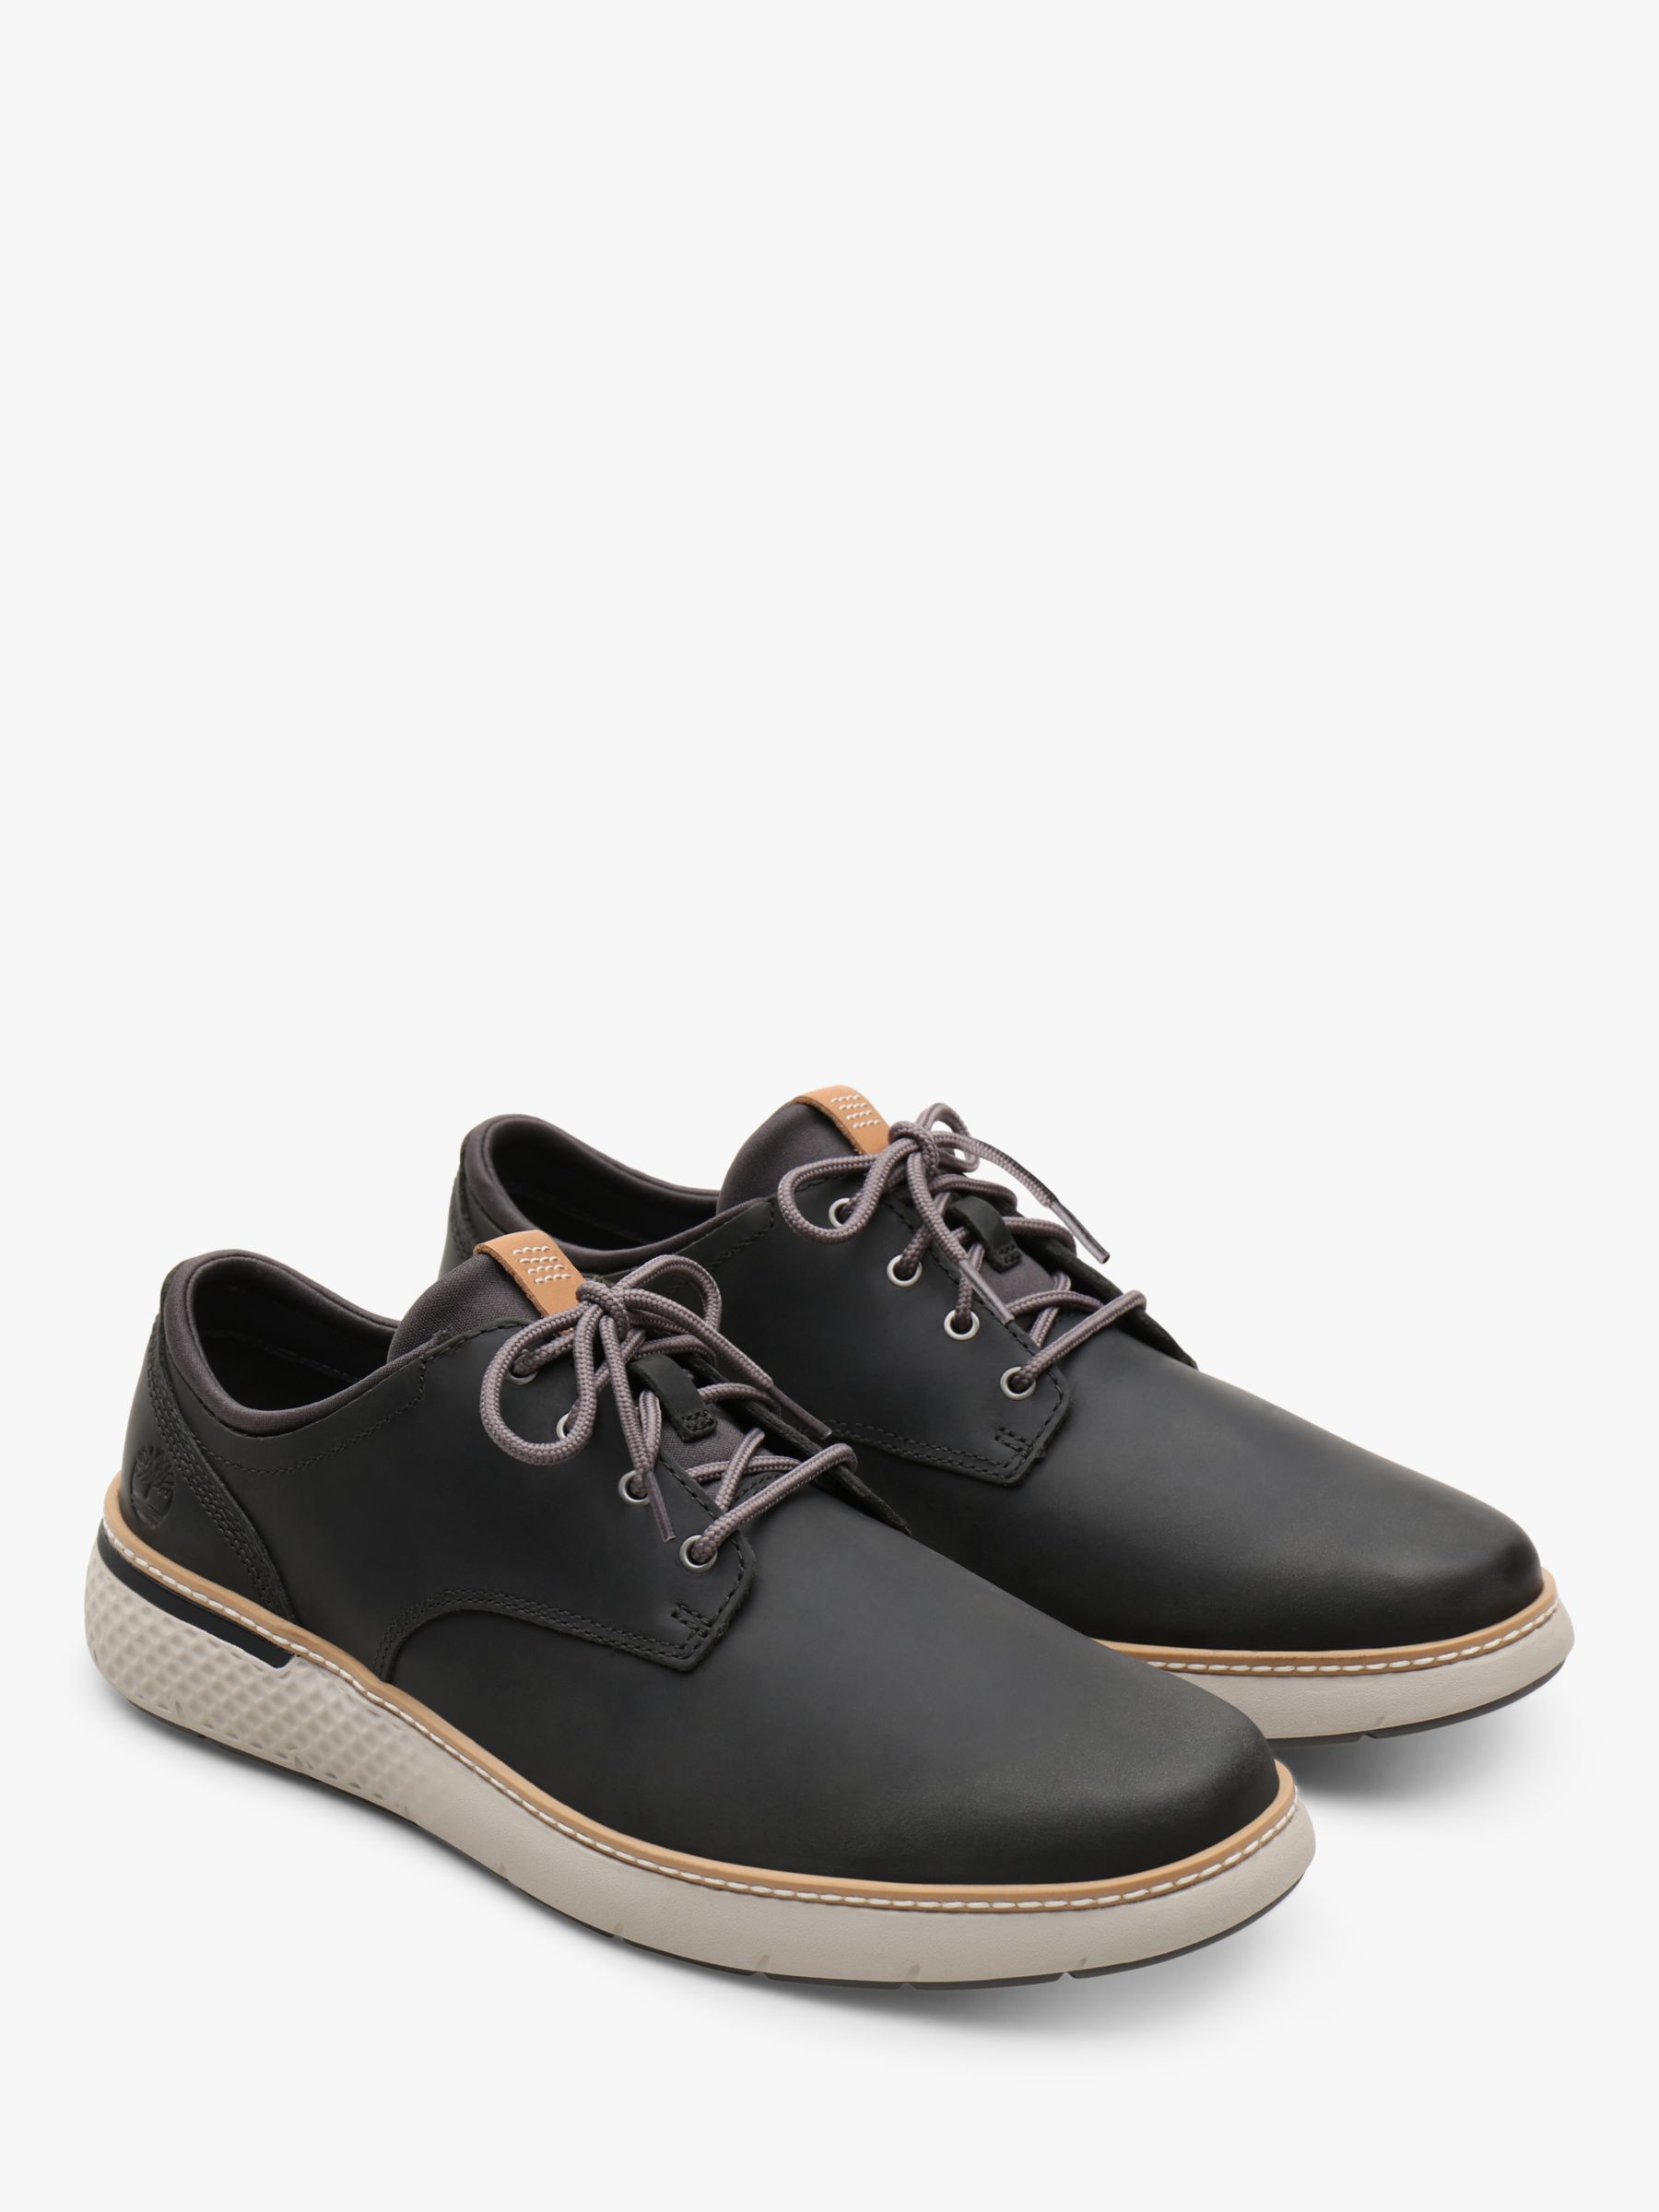 timberland cross mark oxford review